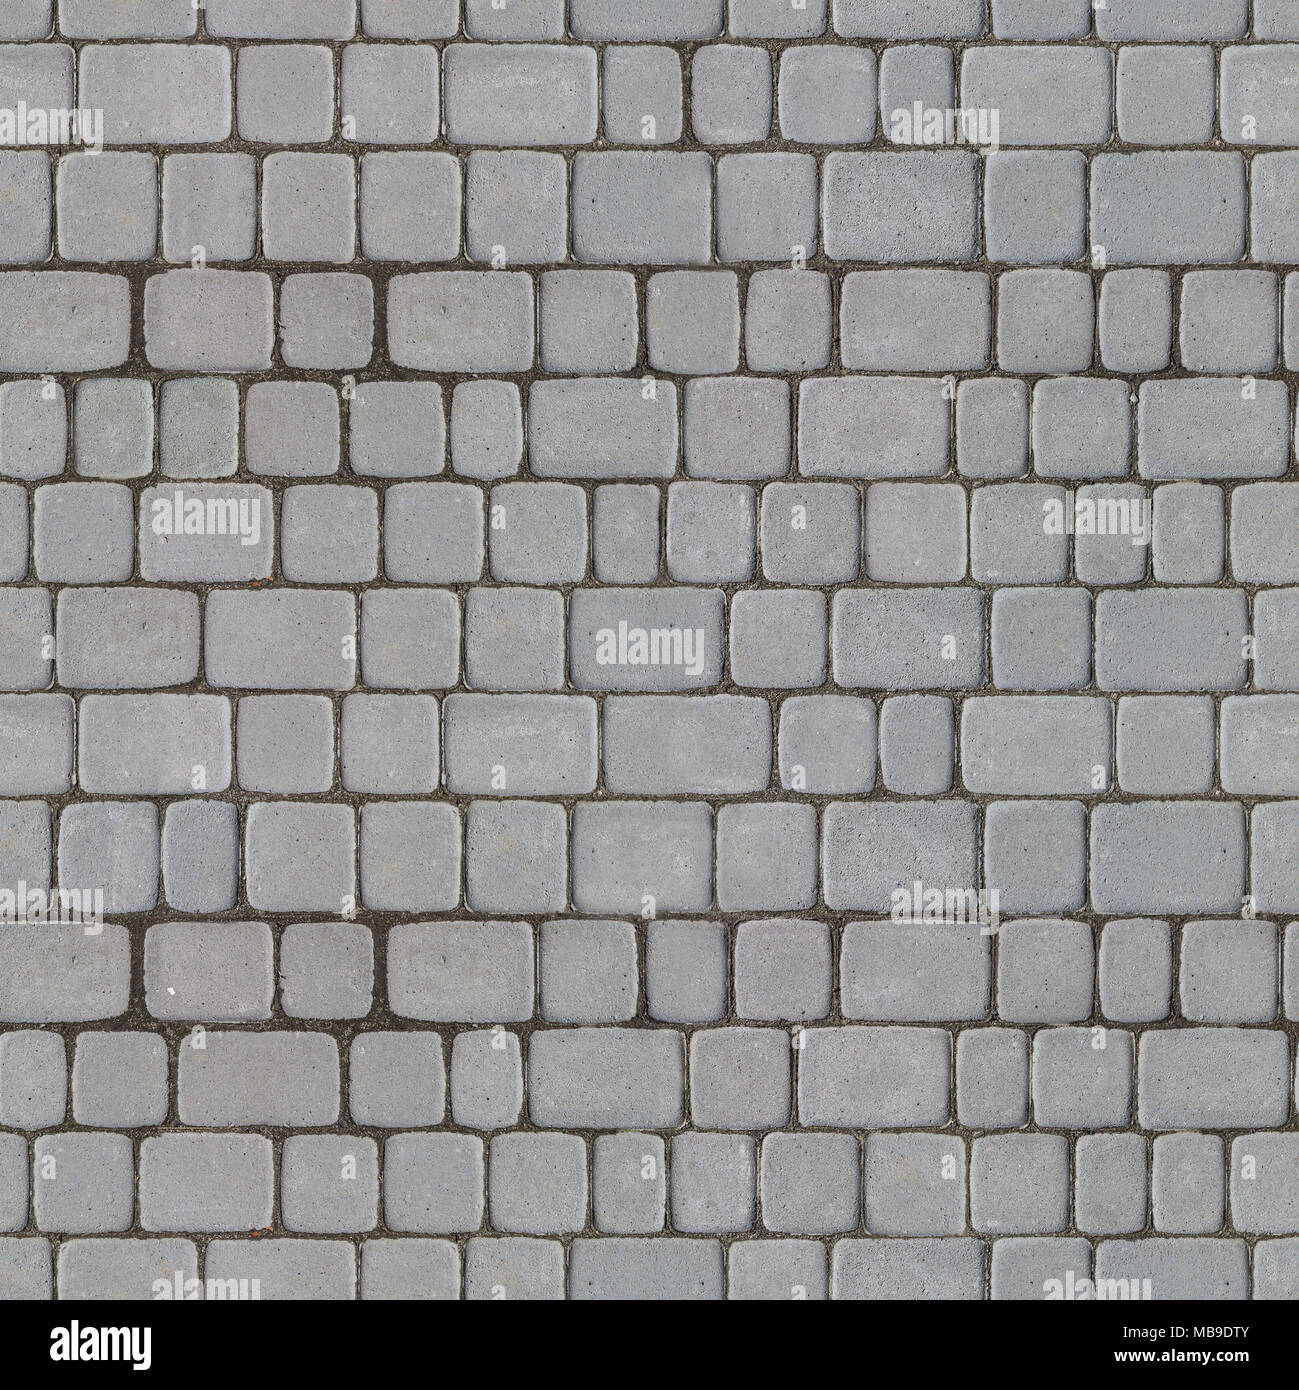 Seamless Tileable Texture of Gray Paving Slabs. Stock Photo